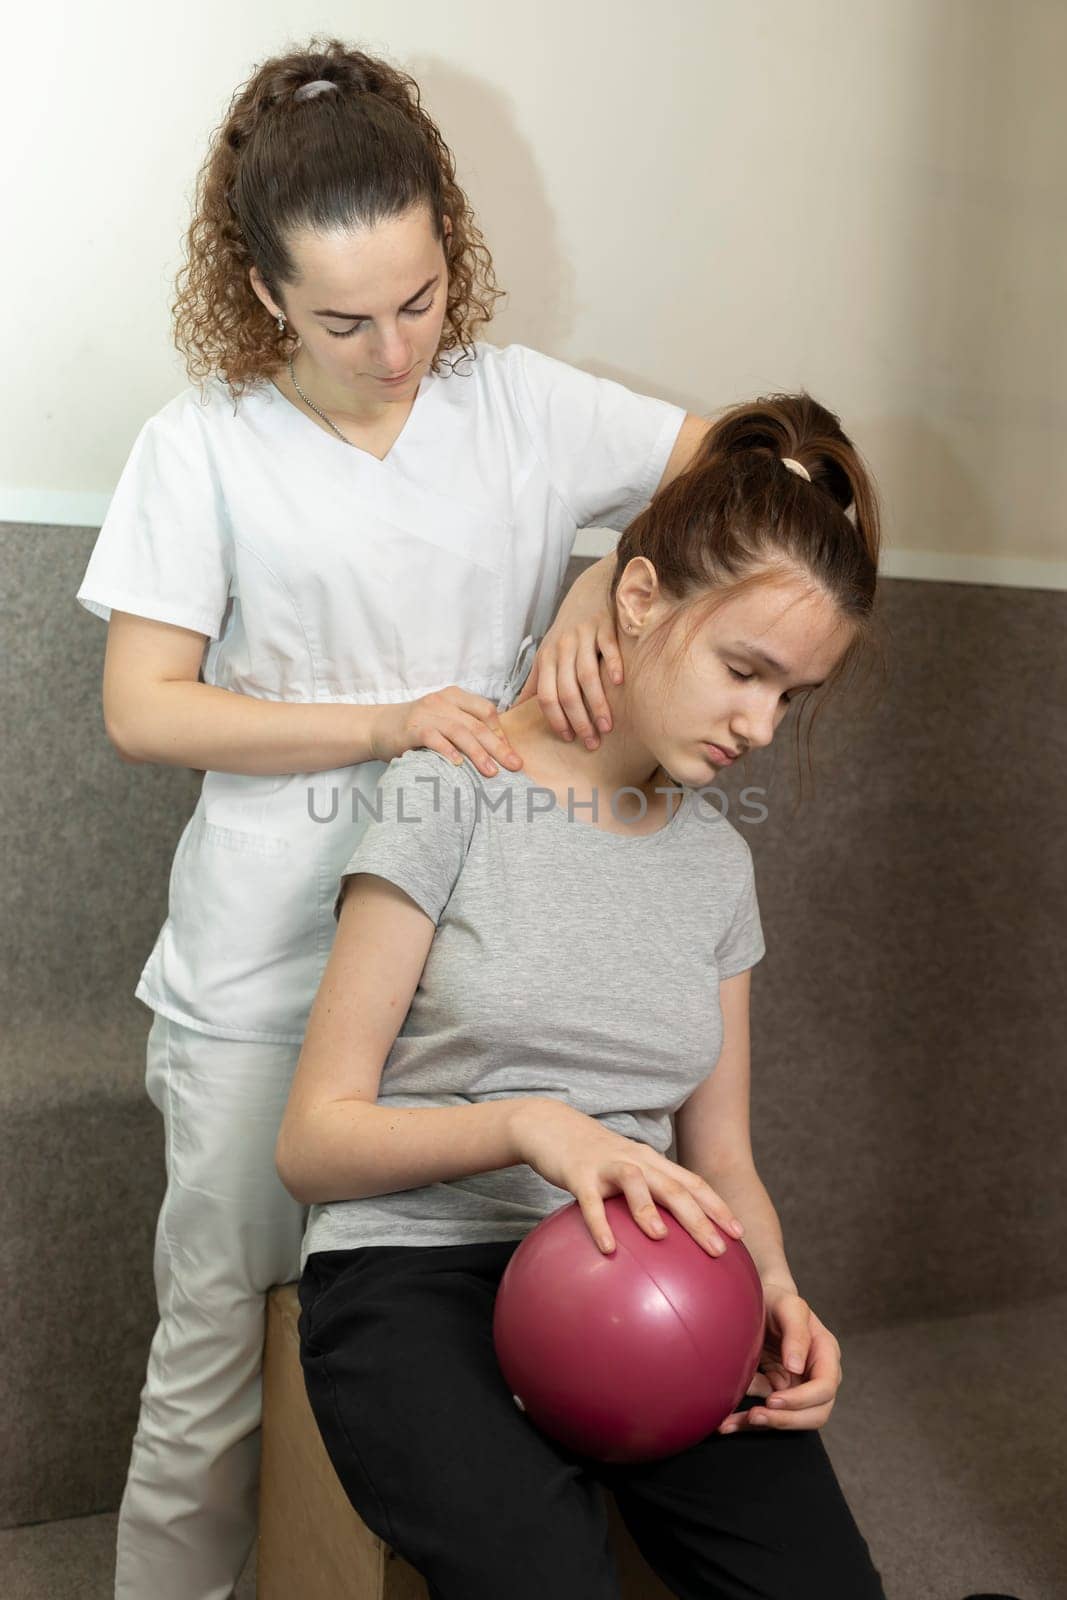 Physical Therapist Does Neck Massage To Child With Disability. Muscle Relaxation, Stretching After Physical Exercises With Ball. Health Support, Rehabilitation In Gym. Vertical plane.